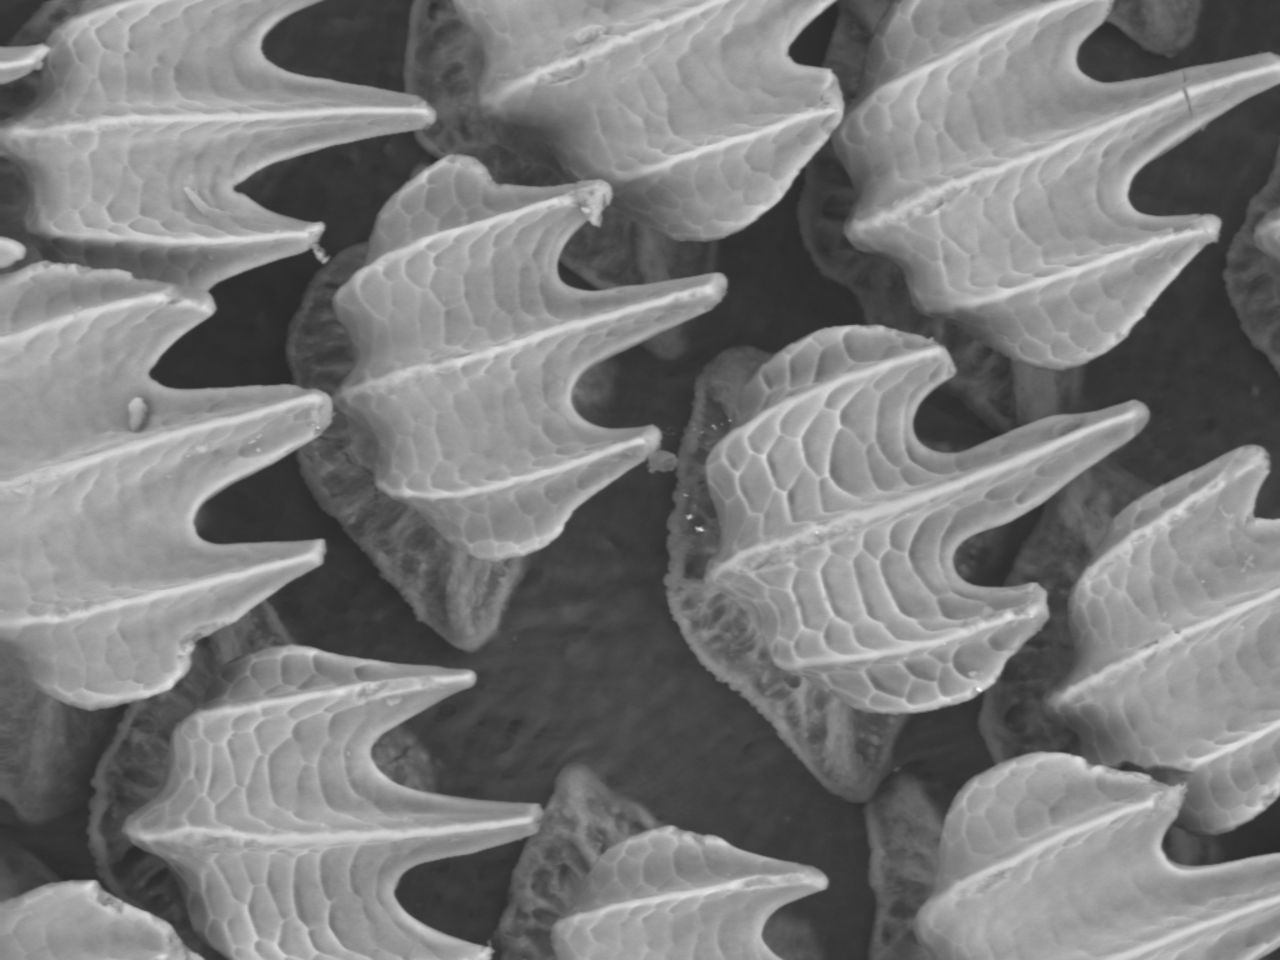 This microscopic image of shark skin shows the dermal denticles which are much like tiny teeth. "It's not a favorable place for bacteria -- they don't like to colonize there," said chemist Mark Dorfman of the Biomimicry Institute. "By putting it on a hospital surface it could remove the need for harsh chemicals."